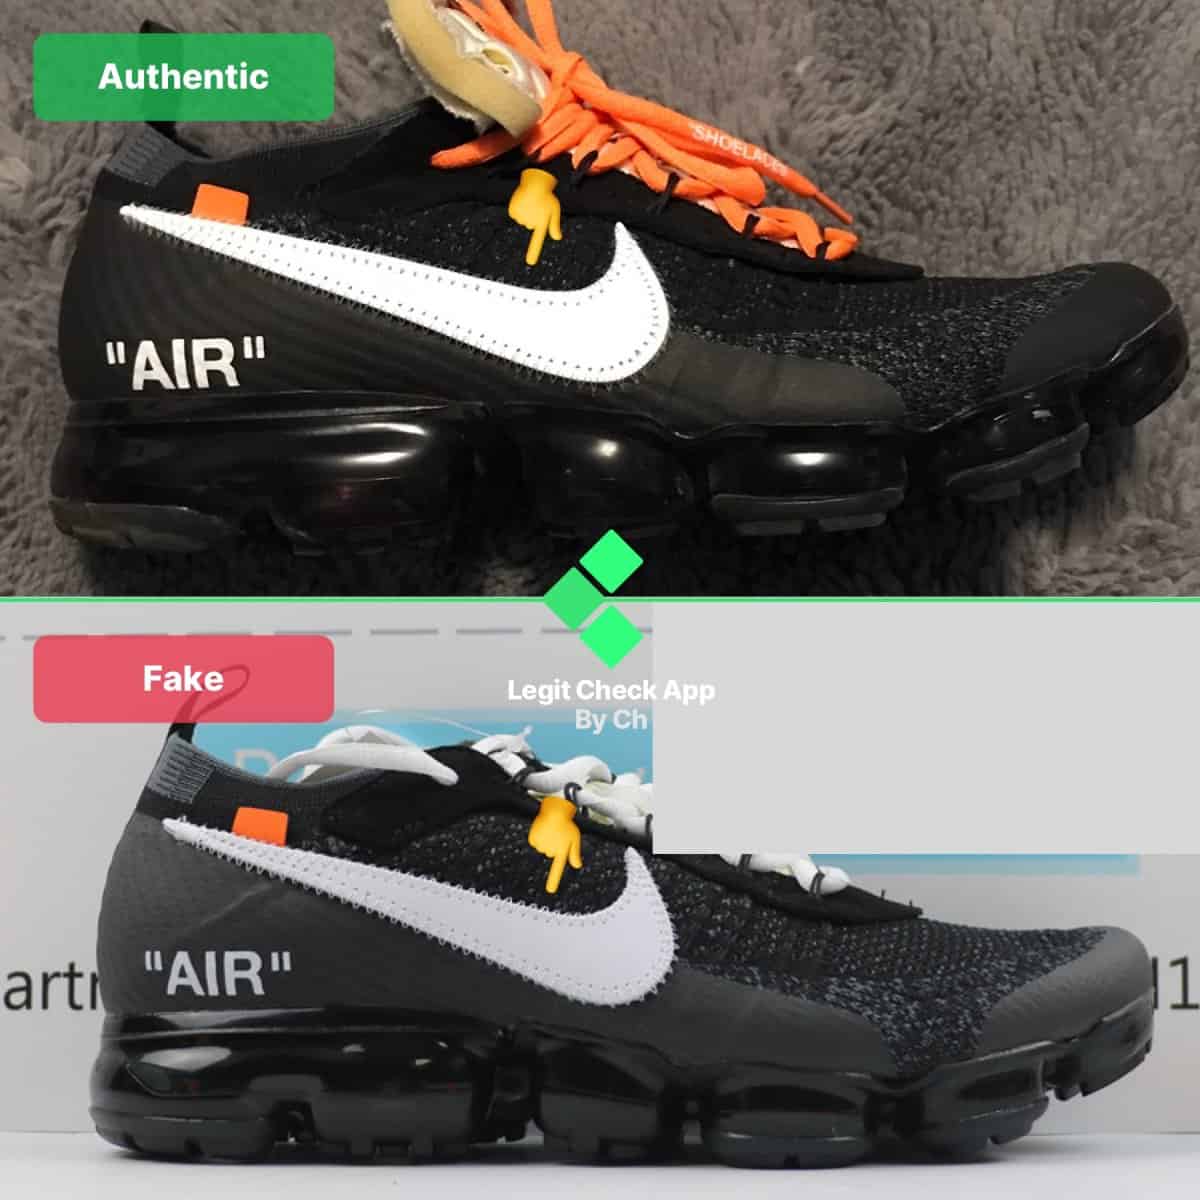 Fake Vs Real Off-White Vapormax Guide - How To Spot Fake OW 